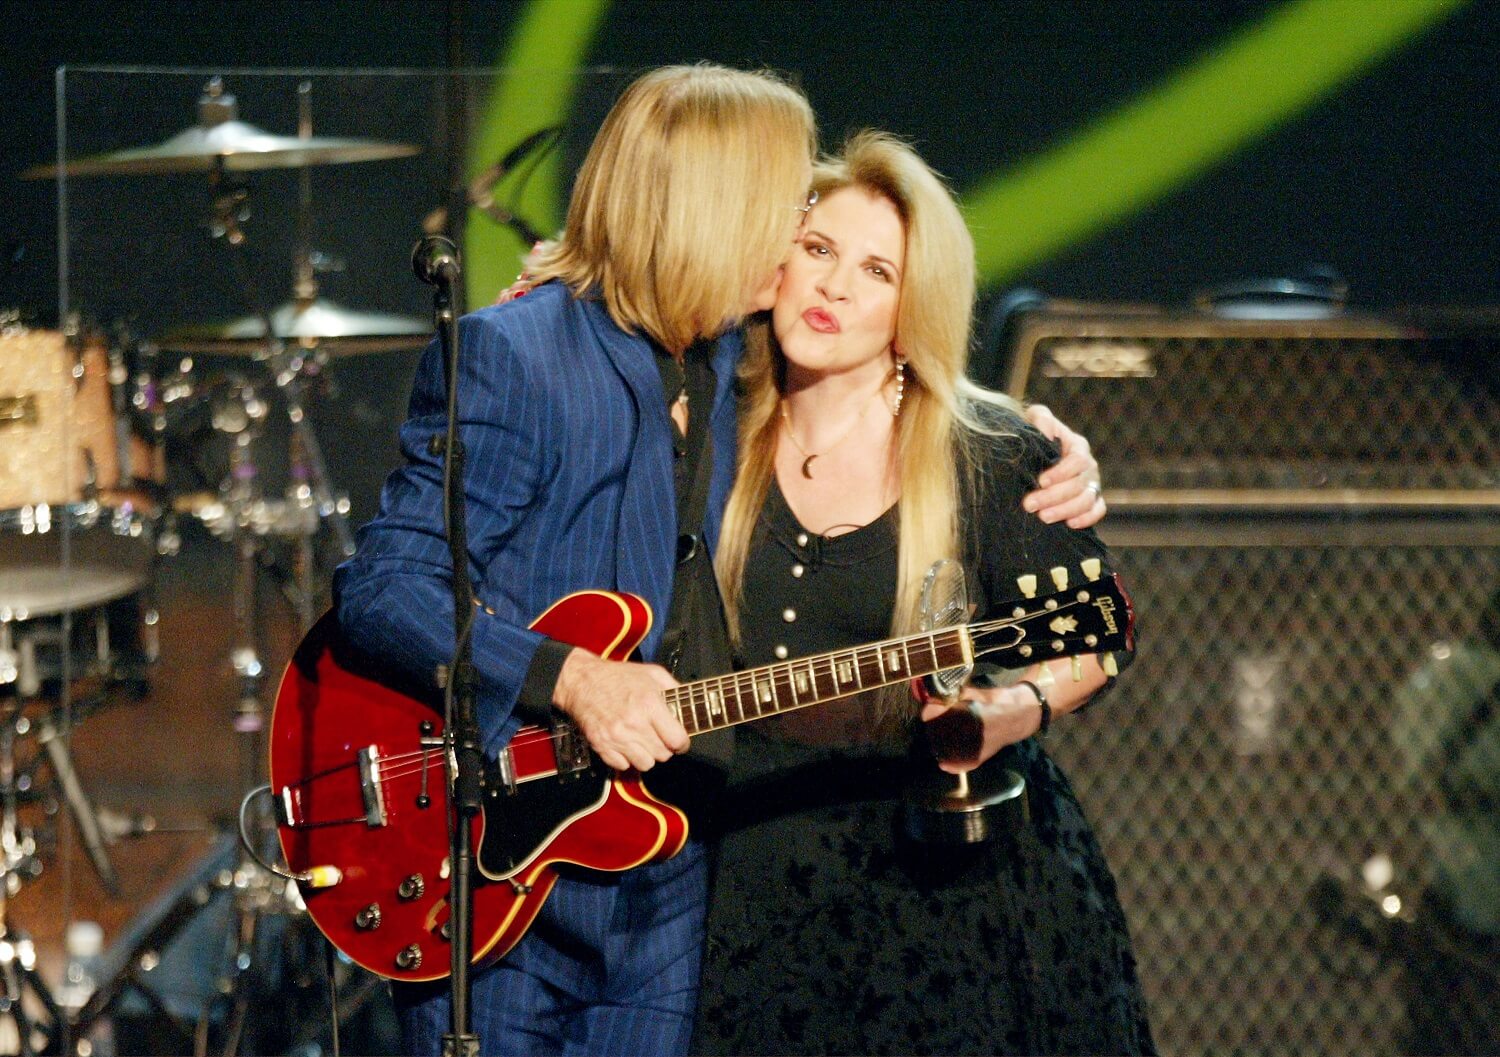 Stevie and Petty